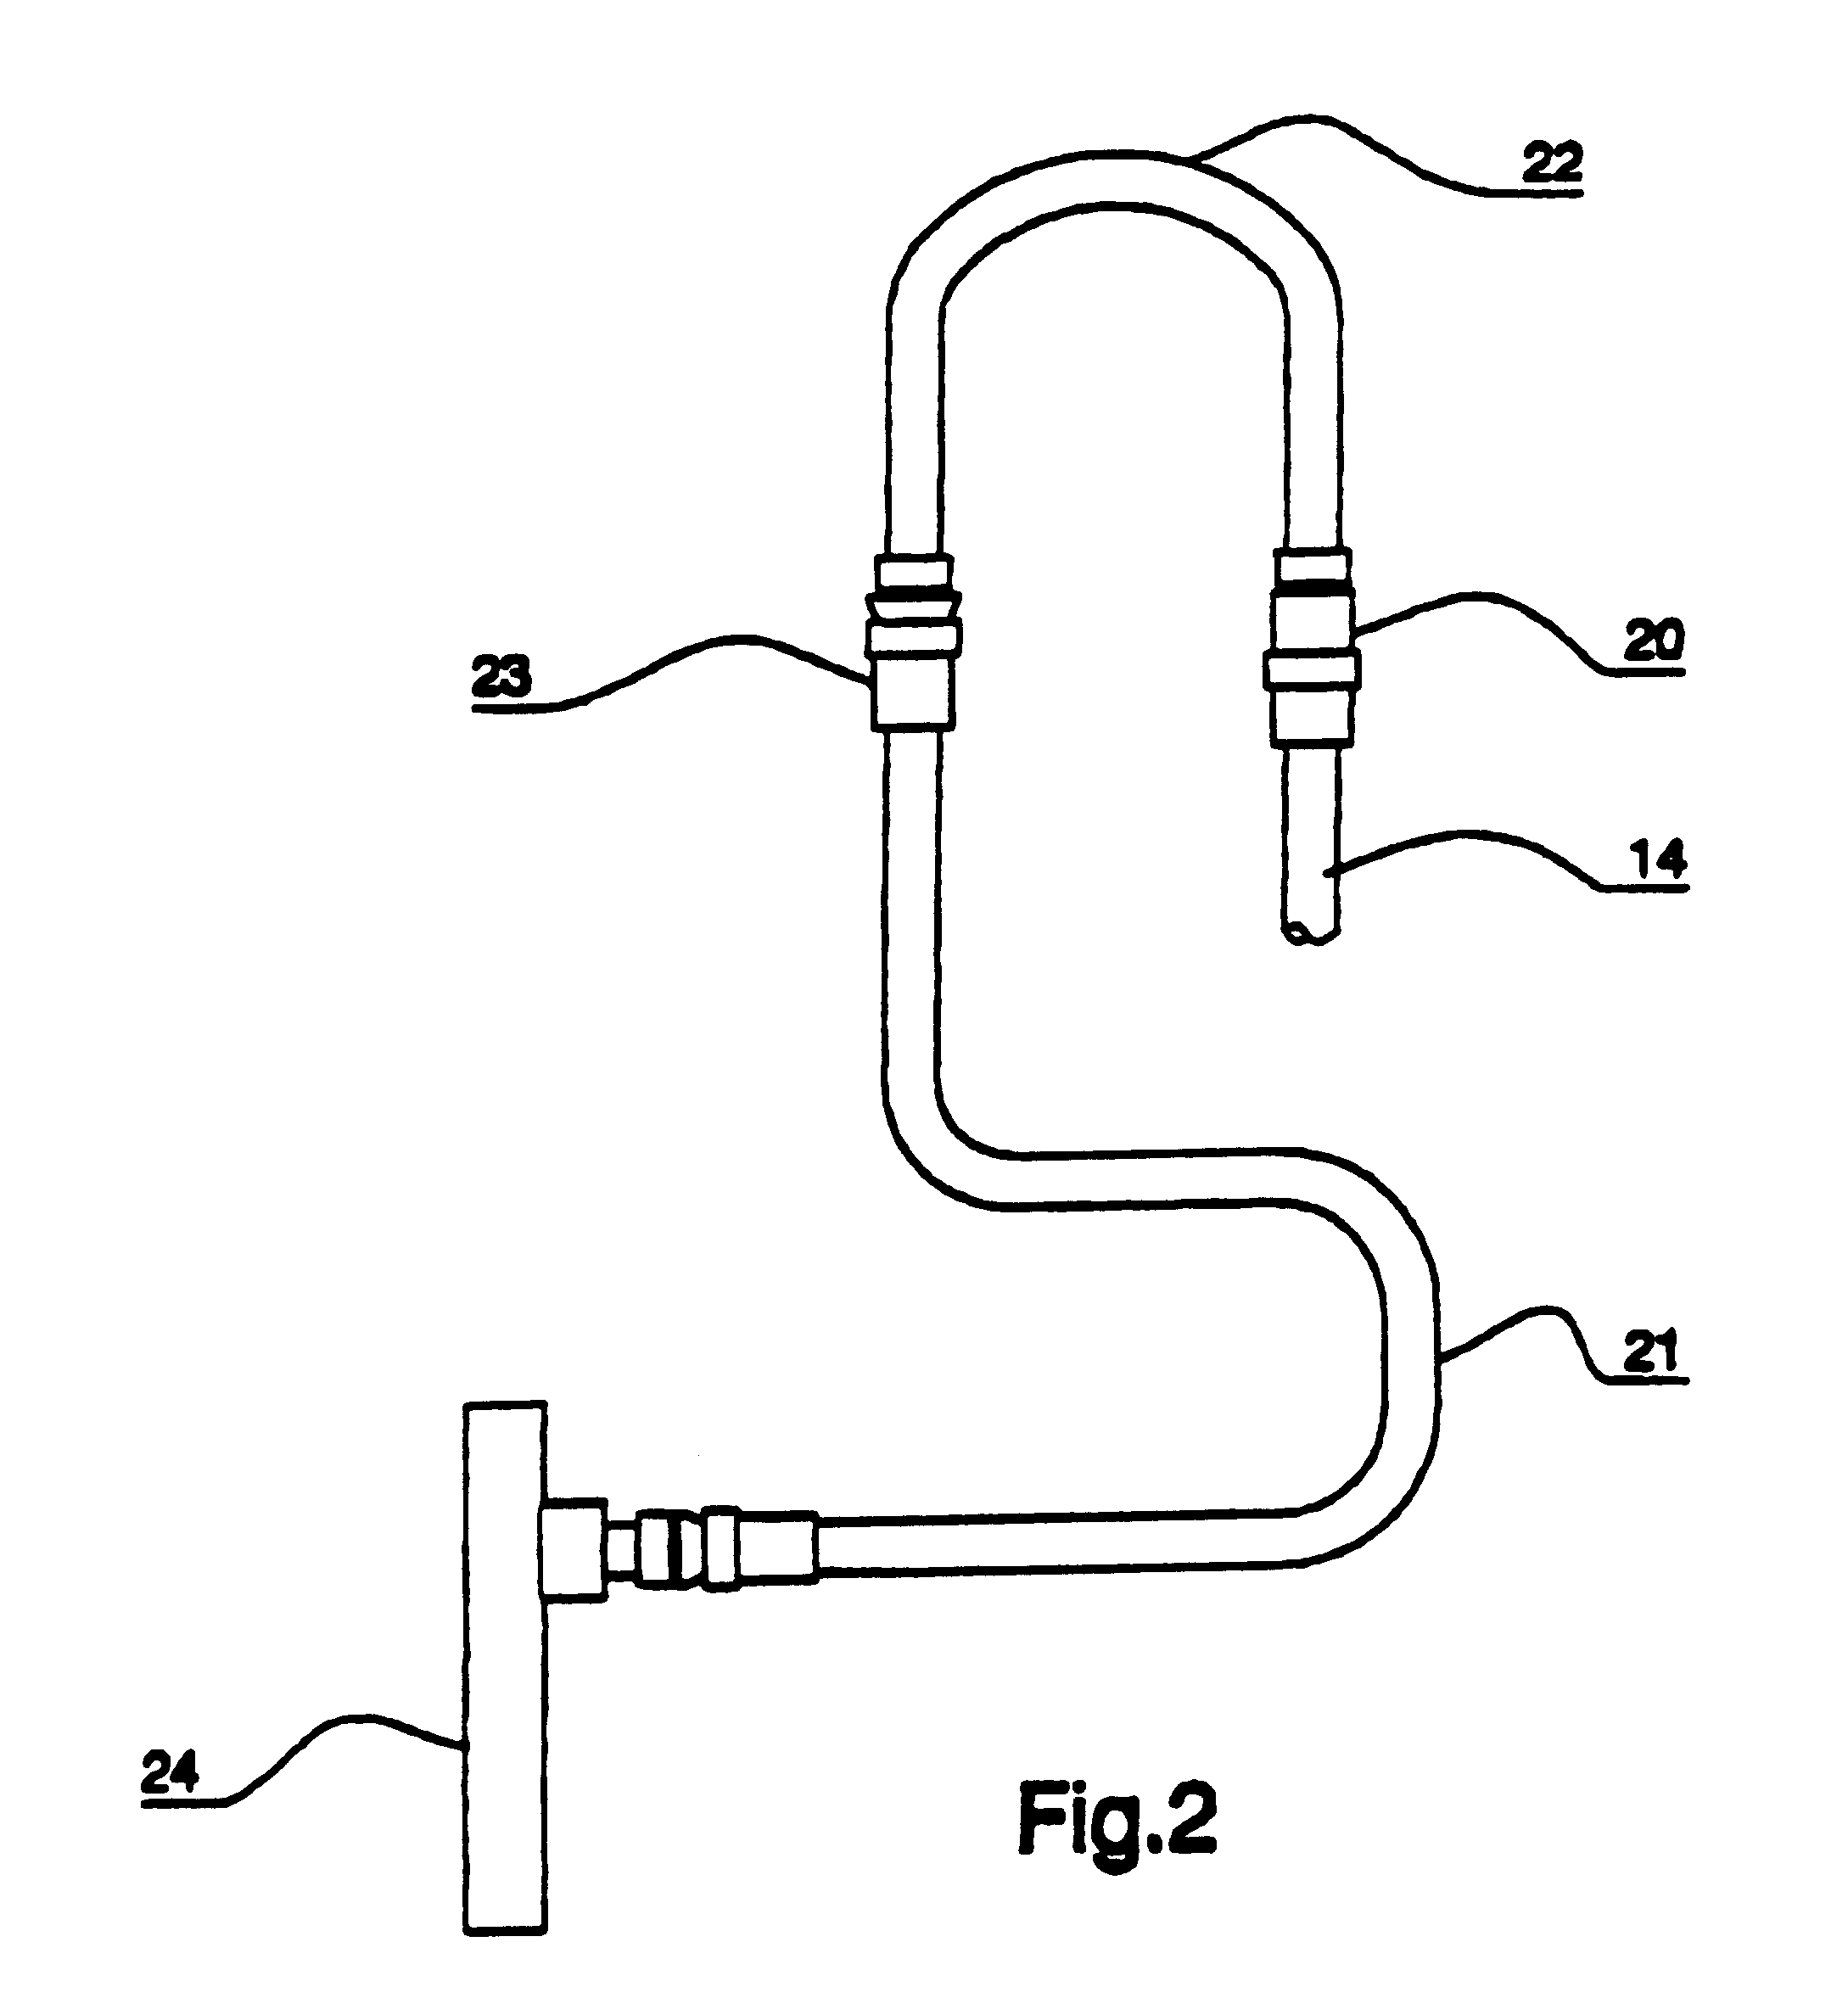 Assembly and method for the extraction of fluids from a drilled well within a geological formation